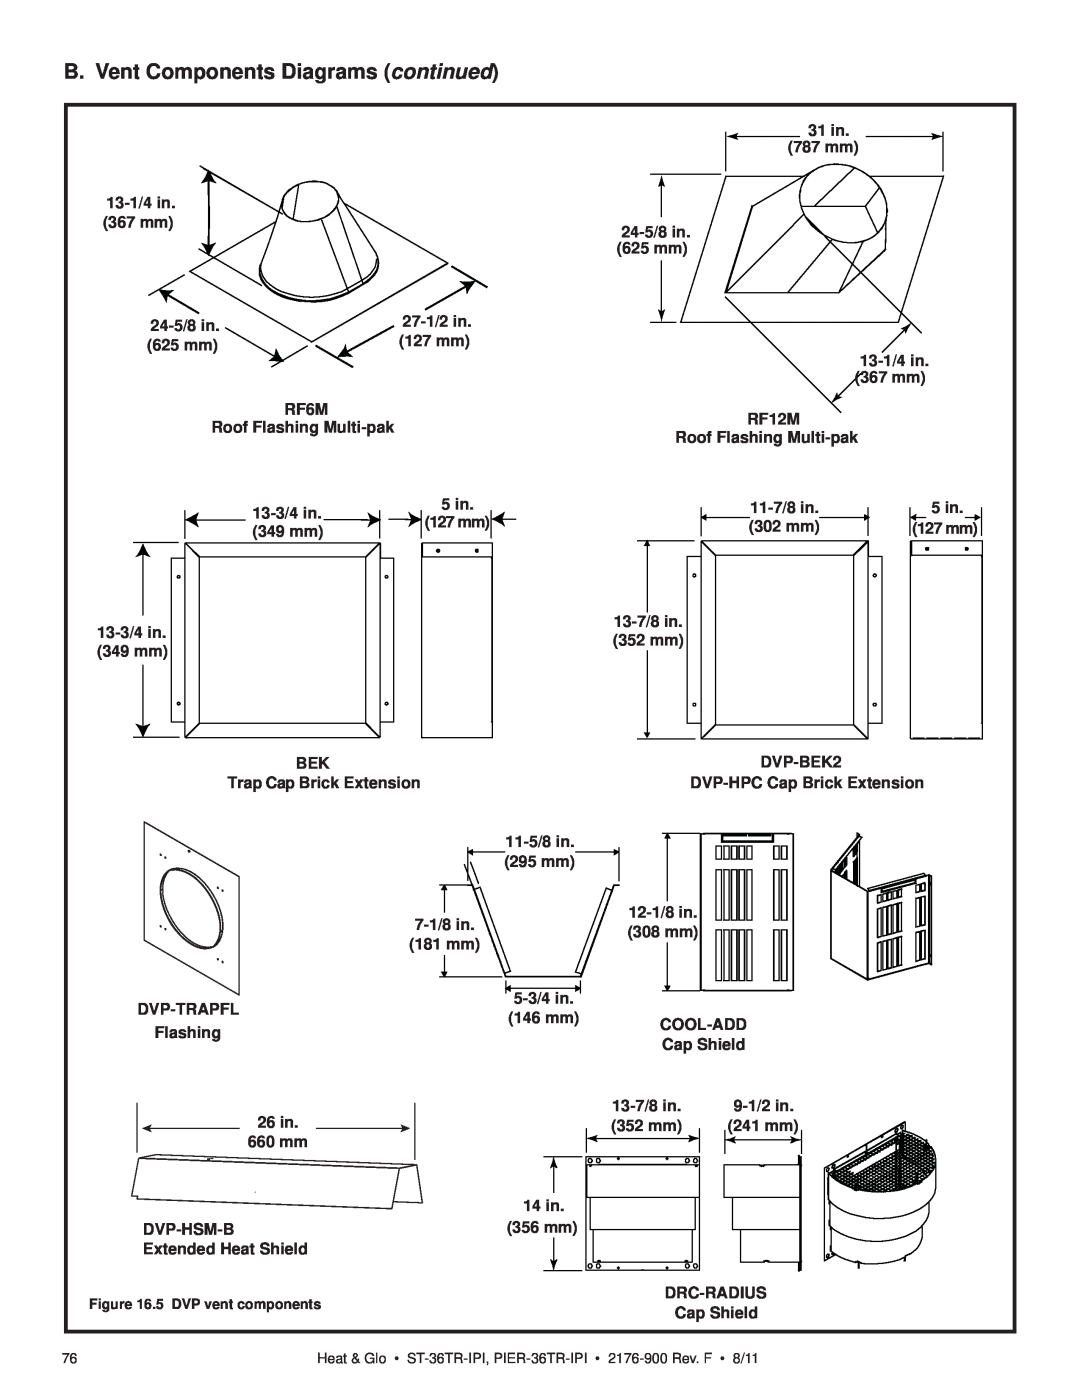 Heat & Glo LifeStyle PIER-36TRLP-IPI B. Vent Components Diagrams continued, 31 in, 787 mm, 13-1/4 in, 367 mm, 24-5/8 in 